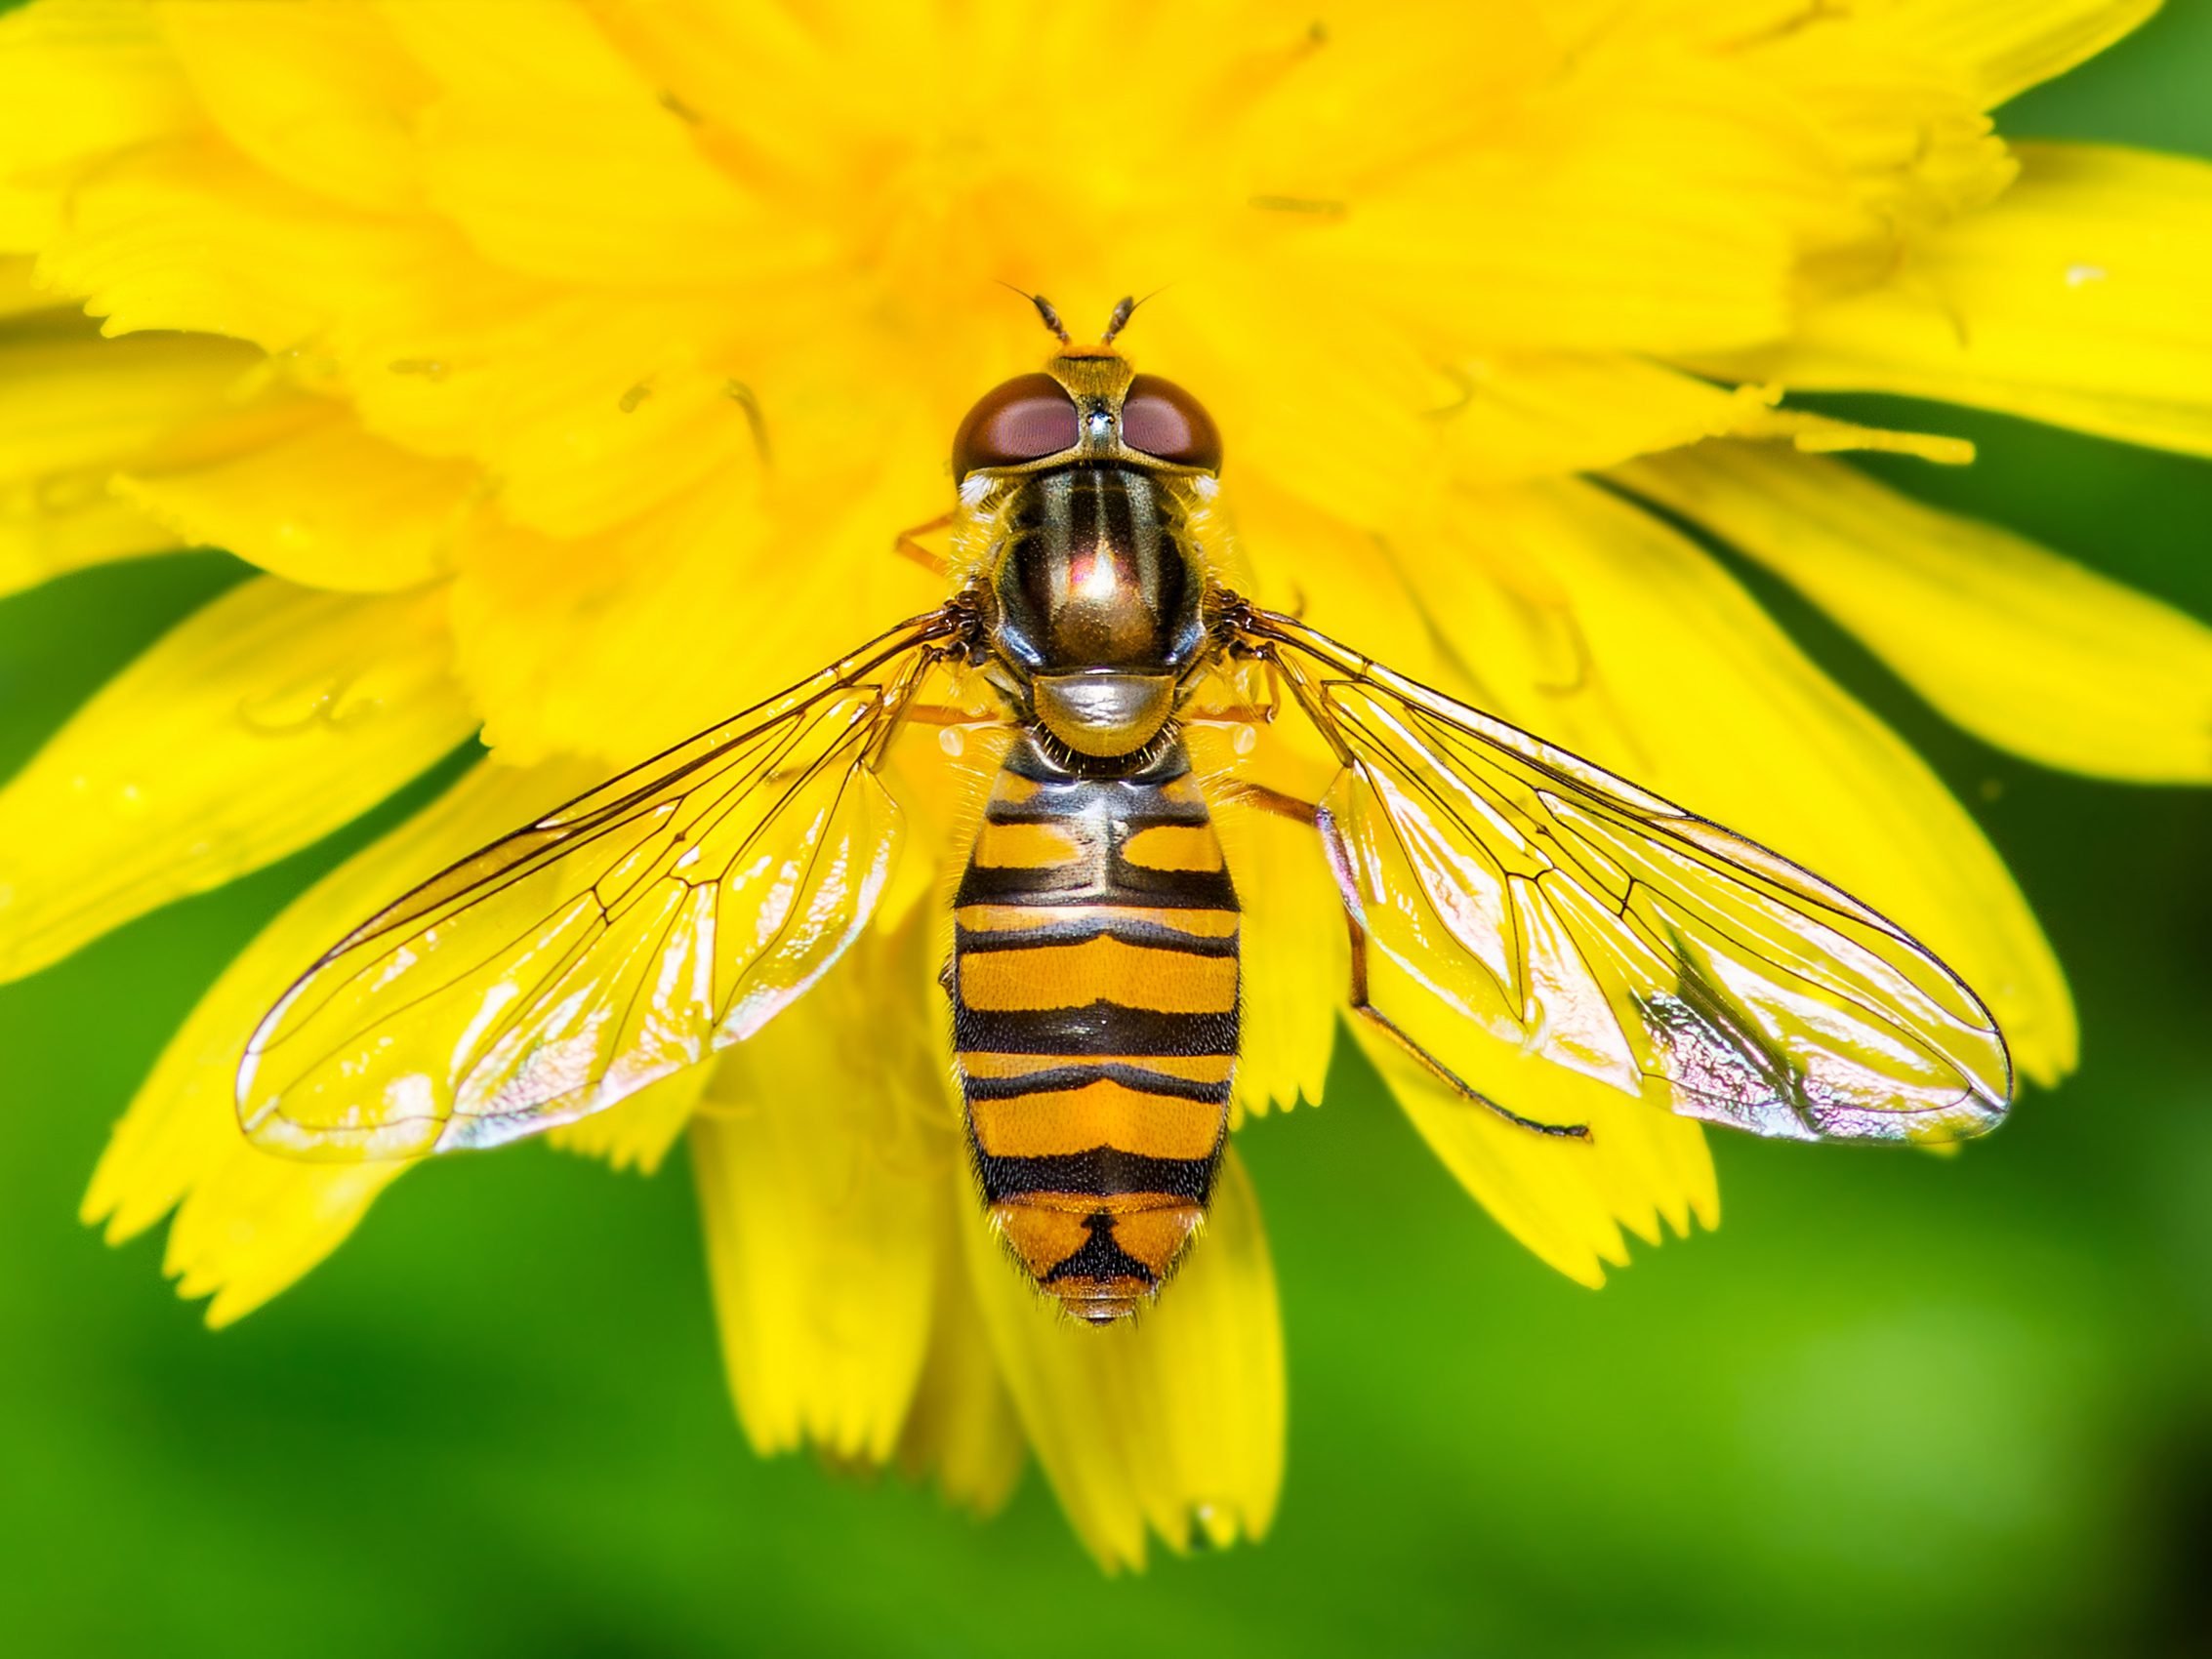 1. Hoverfly